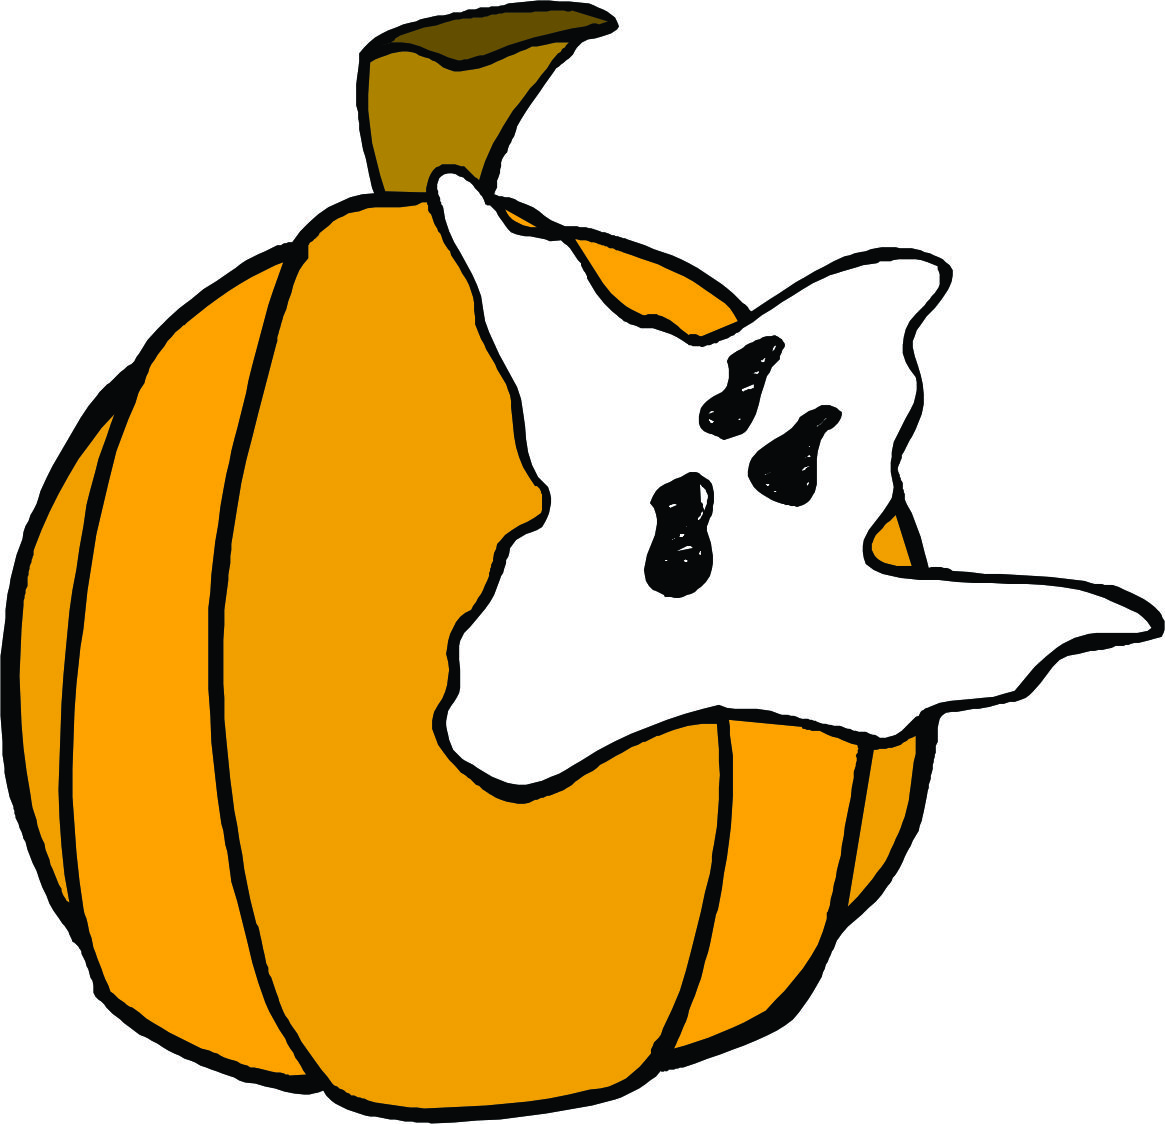 Pictures Of Cartoon Pumpkins - Clipart library